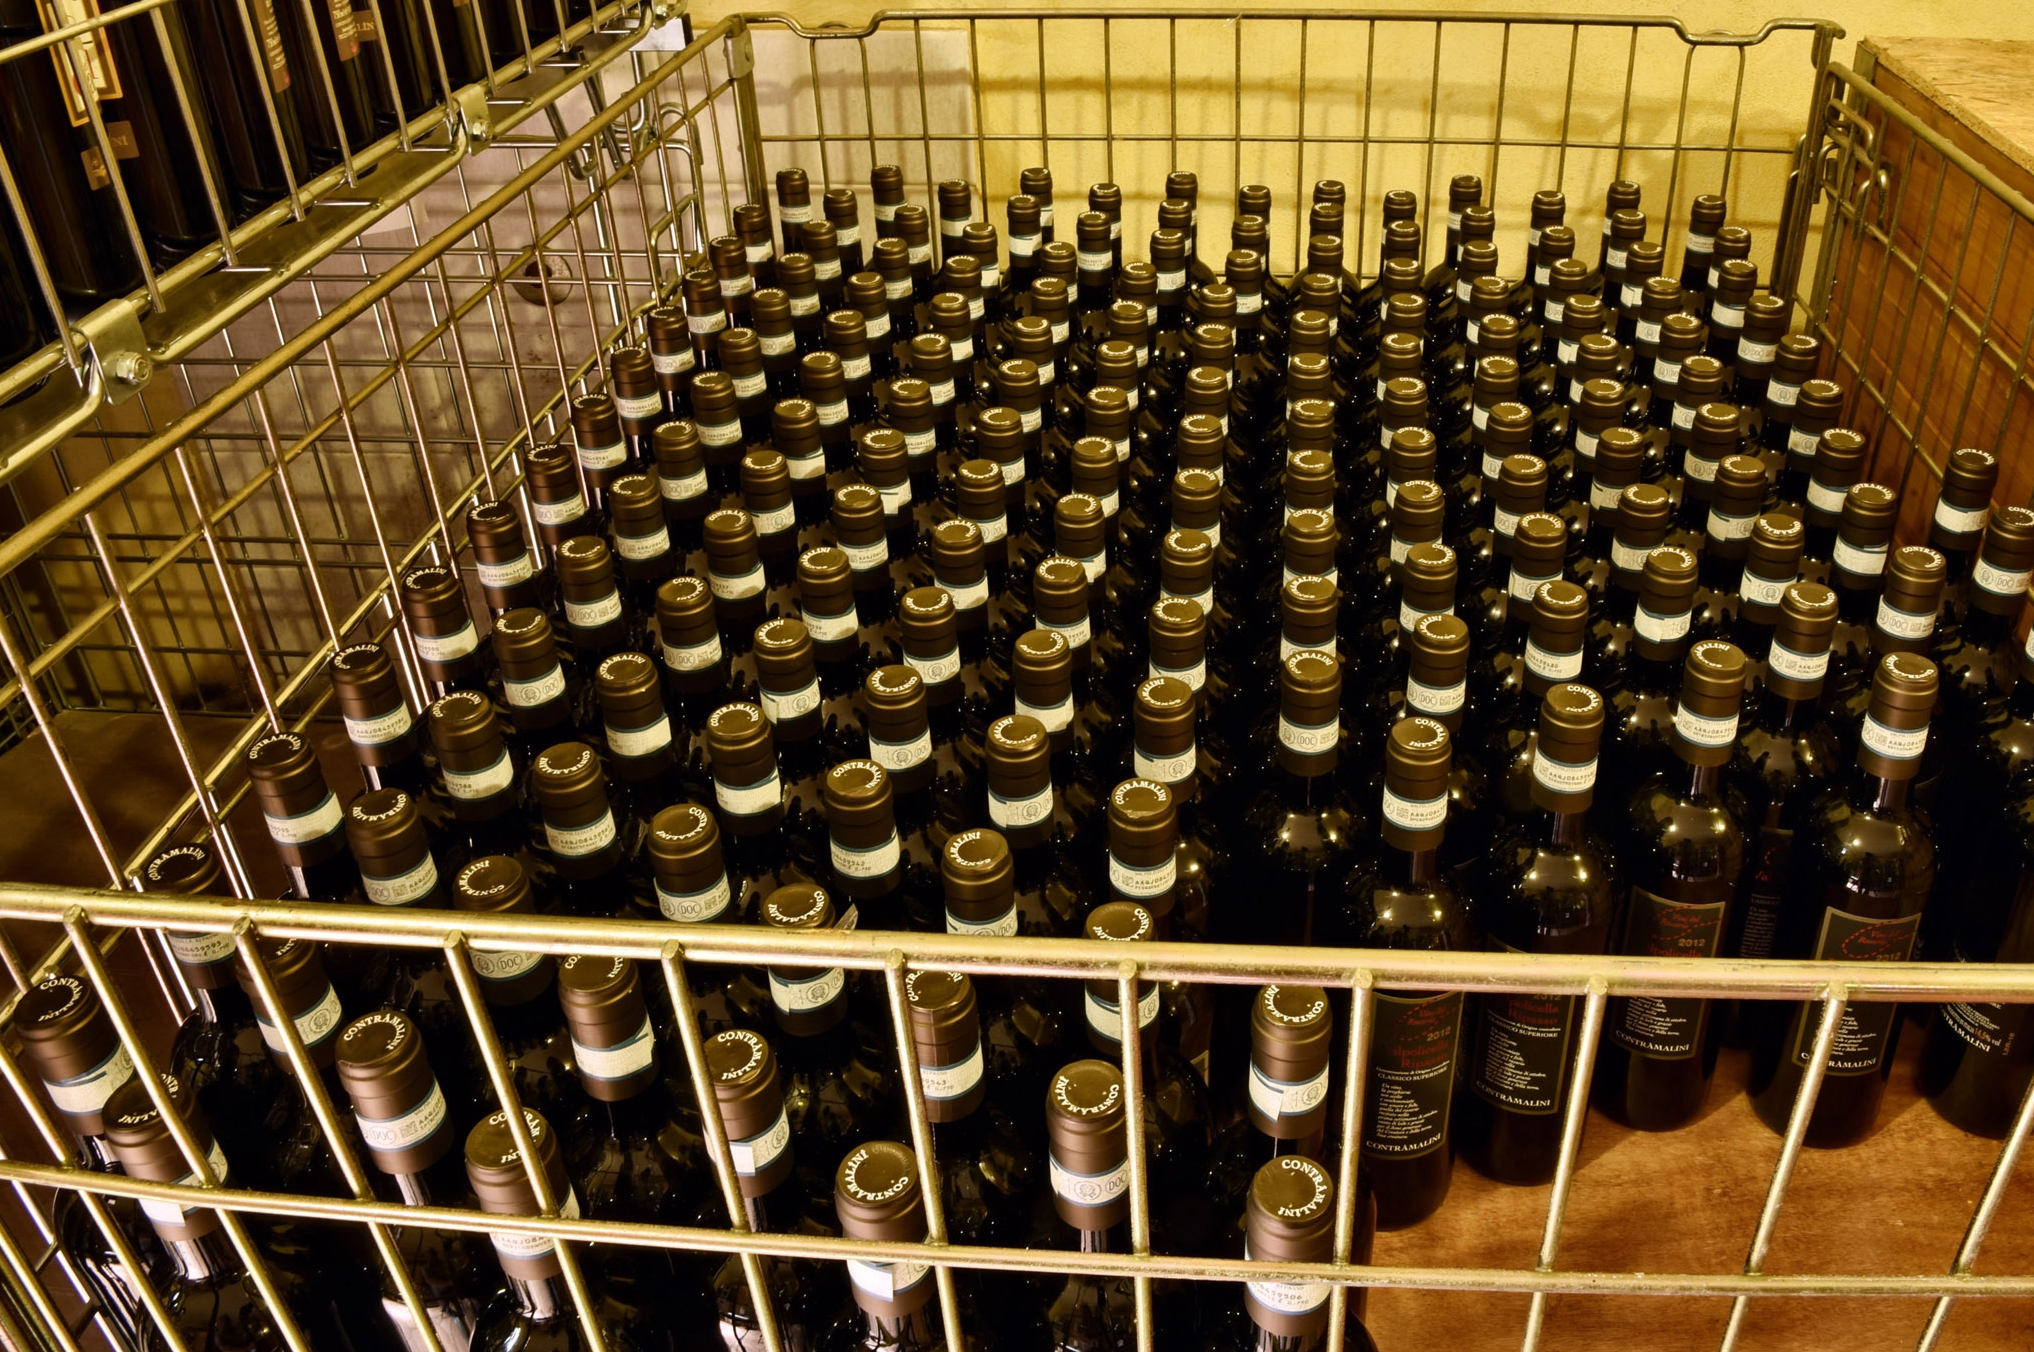 Wine aging in the bottles